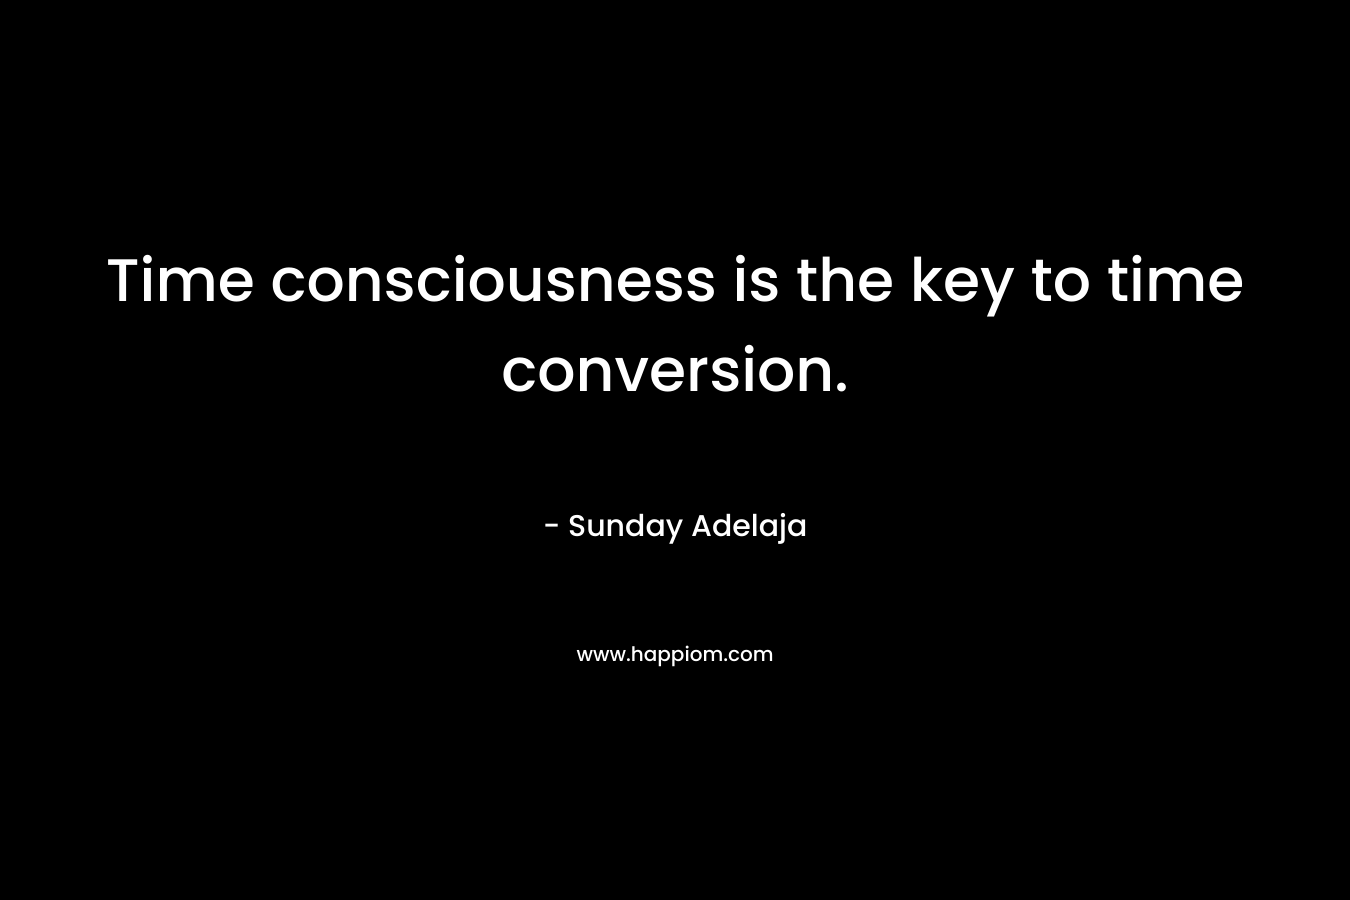 Time consciousness is the key to time conversion.